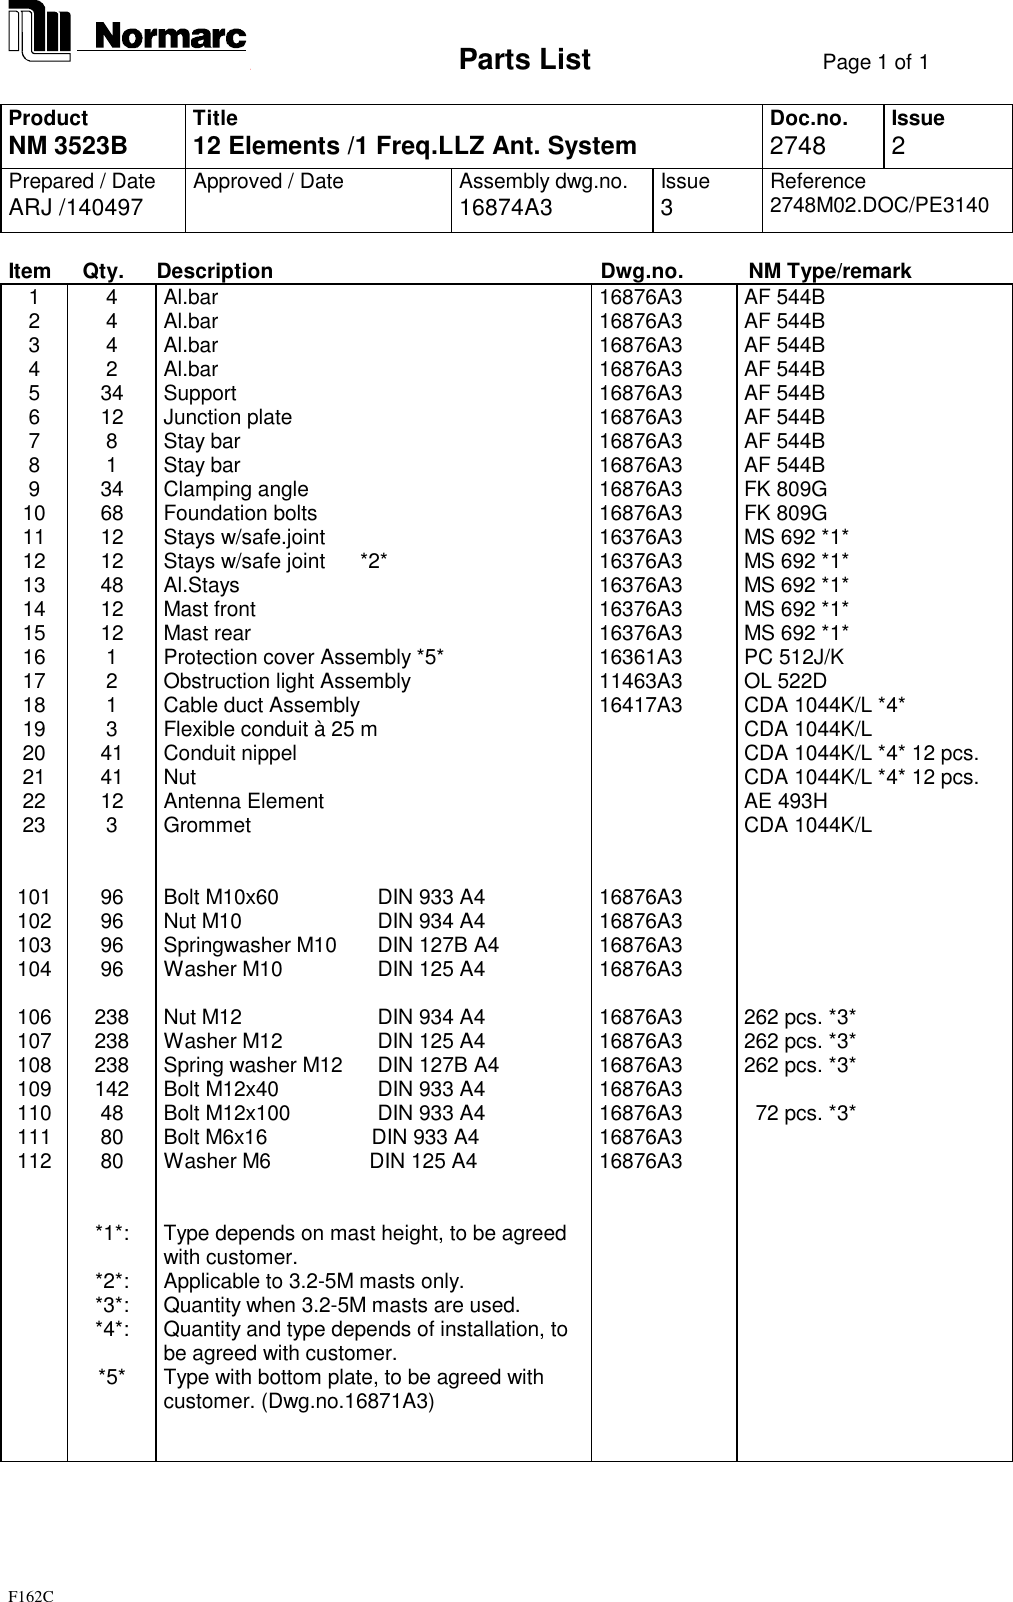                             Parts List Page 1 of 1F162CProductNM 3523B Title12 Elements /1 Freq.LLZ Ant. System Doc.no.2748 Issue2Prepared / DateARJ /140497 Approved / Date Assembly dwg.no.16874A3 Issue3Reference2748M02.DOC/PE3140Item Qty. Description Dwg.no. NM Type/remark1 4 Al.bar 16876A3 AF 544B2 4 Al.bar 16876A3 AF 544B3 4 Al.bar 16876A3 AF 544B4 2 Al.bar 16876A3 AF 544B5 34 Support 16876A3 AF 544B6 12 Junction plate 16876A3 AF 544B7 8 Stay bar 16876A3 AF 544B8 1 Stay bar 16876A3 AF 544B9 34 Clamping angle 16876A3 FK 809G10 68 Foundation bolts 16876A3 FK 809G11 12 Stays w/safe.joint 16376A3 MS 692 *1*12 12 Stays w/safe joint      *2* 16376A3 MS 692 *1*13 48 Al.Stays 16376A3 MS 692 *1*14 12 Mast front 16376A3 MS 692 *1*15 12 Mast rear 16376A3 MS 692 *1*16 1 Protection cover Assembly *5* 16361A3 PC 512J/K17 2 Obstruction light Assembly 11463A3 OL 522D18 1 Cable duct Assembly 16417A3 CDA 1044K/L *4*19 3 Flexible conduit à 25 m CDA 1044K/L20 41 Conduit nippel CDA 1044K/L *4* 12 pcs.21 41 Nut CDA 1044K/L *4* 12 pcs.22 12 Antenna Element AE 493H23 3 Grommet CDA 1044K/L101 96 Bolt M10x60     DIN 933 A4 16876A3102 96 Nut M10         DIN 934 A4 16876A3103 96 Springwasher M10    DIN 127B A4 16876A3104 96 Washer M10     DIN 125 A4 16876A3106 238 Nut M12          DIN 934 A4 16876A3 262 pcs. *3*107 238 Washer M12      DIN 125 A4 16876A3 262 pcs. *3*108 238 Spring washer M12   DIN 127B A4 16876A3 262 pcs. *3*109 142 Bolt M12x40       DIN 933 A4 16876A3110 48 Bolt M12x100     DIN 933 A4 16876A3   72 pcs. *3*111 80 Bolt M6x16                  DIN 933 A4 16876A3112 80 Washer M6                 DIN 125 A4 16876A3*1*: Type depends on mast height, to be agreedwith customer.*2*: Applicable to 3.2-5M masts only.*3*: Quantity when 3.2-5M masts are used.*4*: Quantity and type depends of installation, tobe agreed with customer.*5* Type with bottom plate, to be agreed withcustomer. (Dwg.no.16871A3)